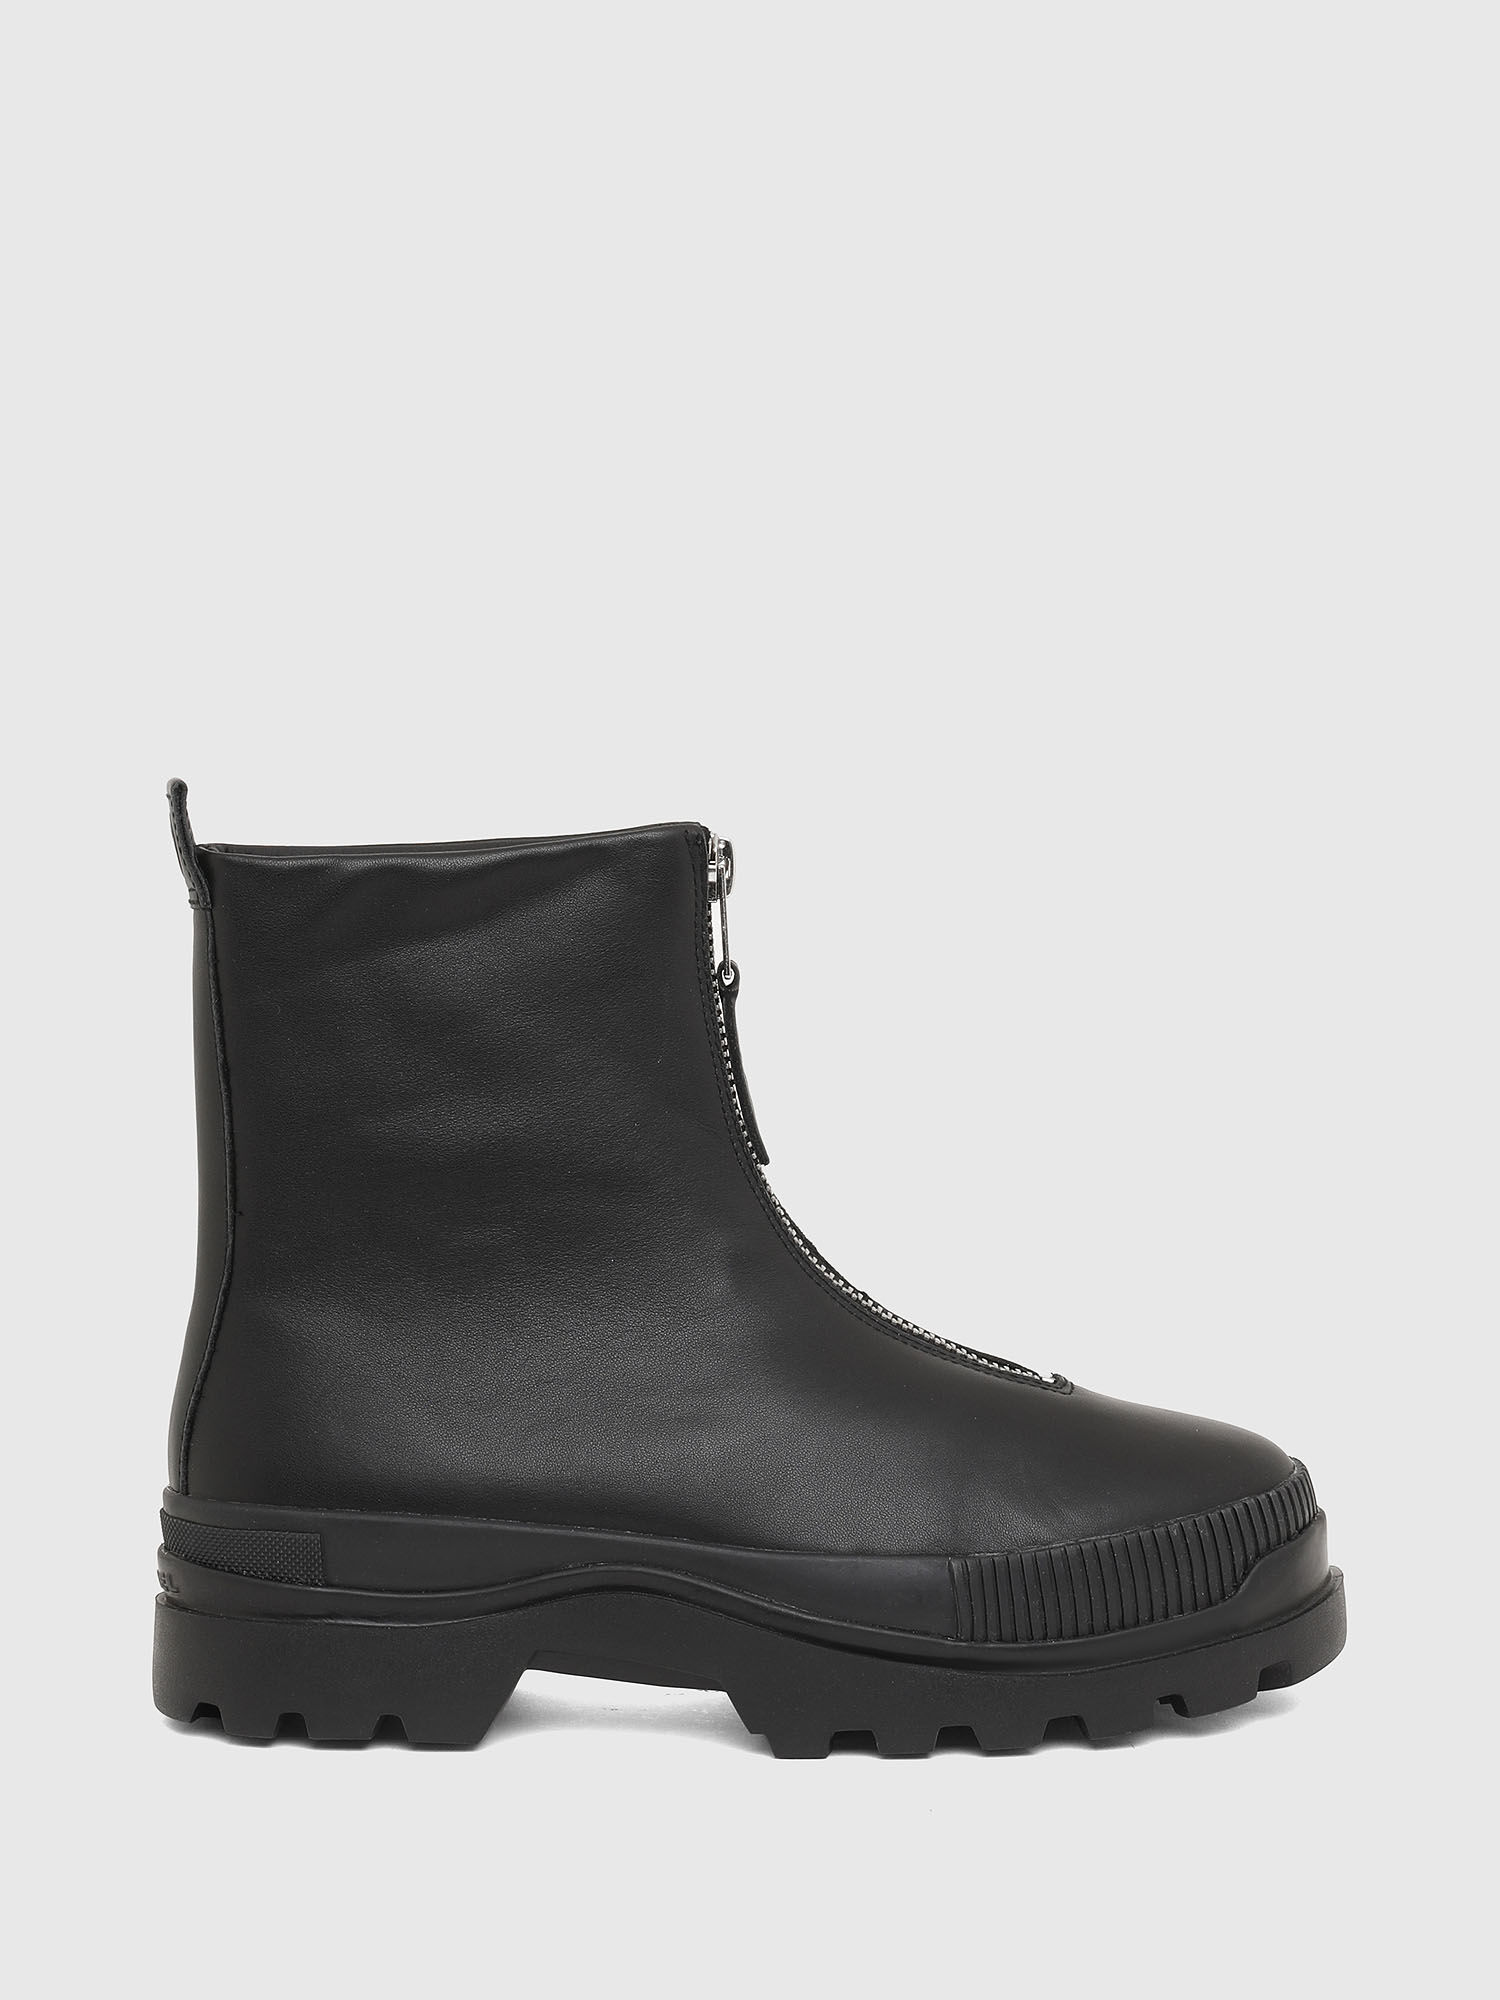 Leather boots with front zip | Diesel